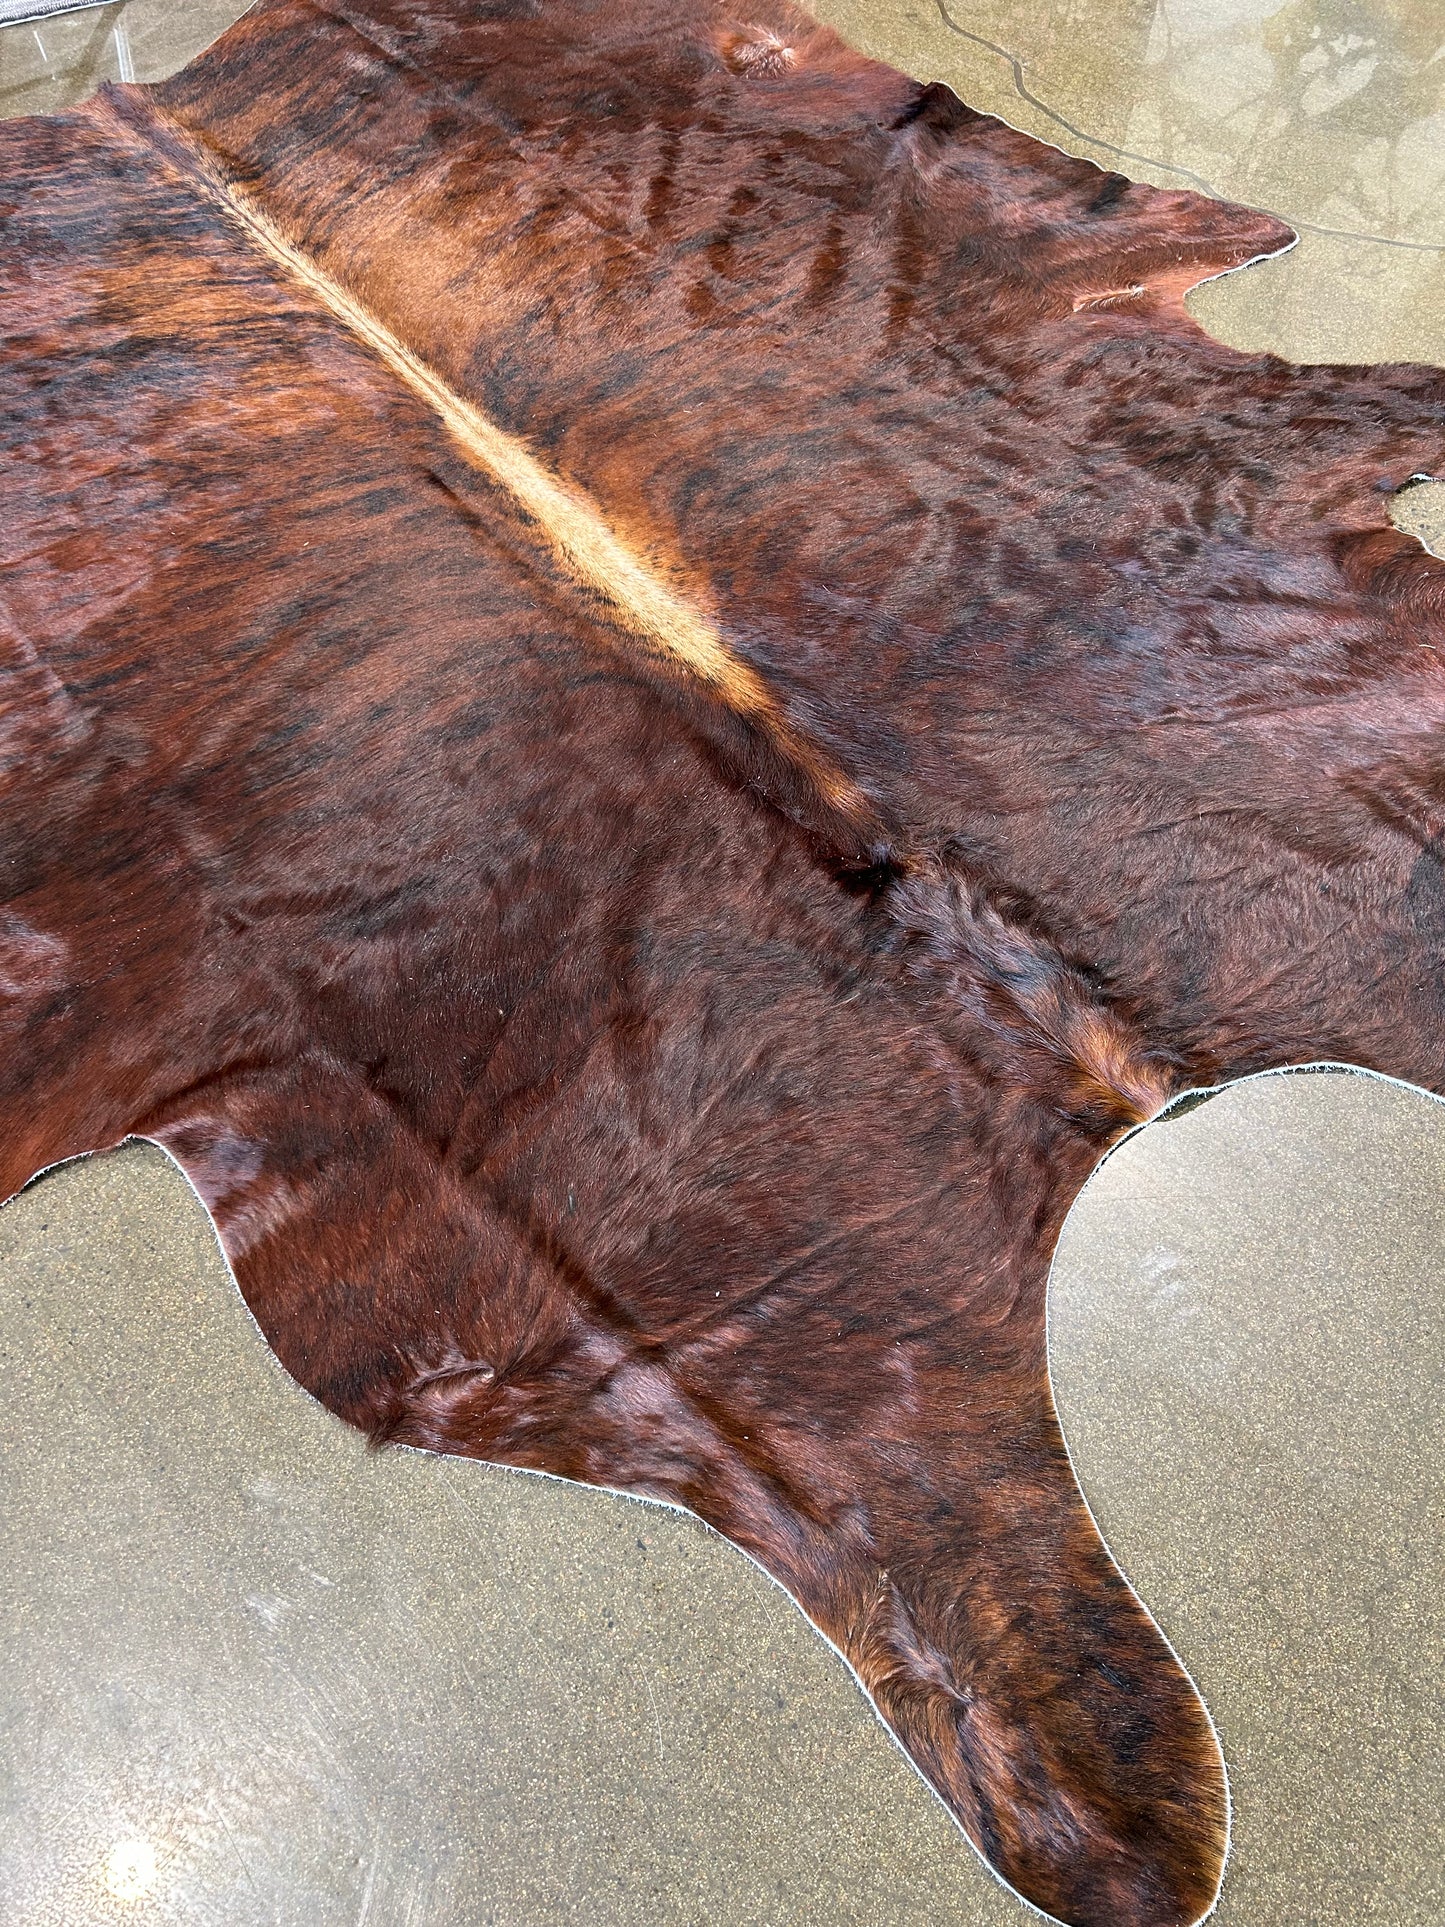 LL-2: Cowhide rug - Very large brown and ivory striped